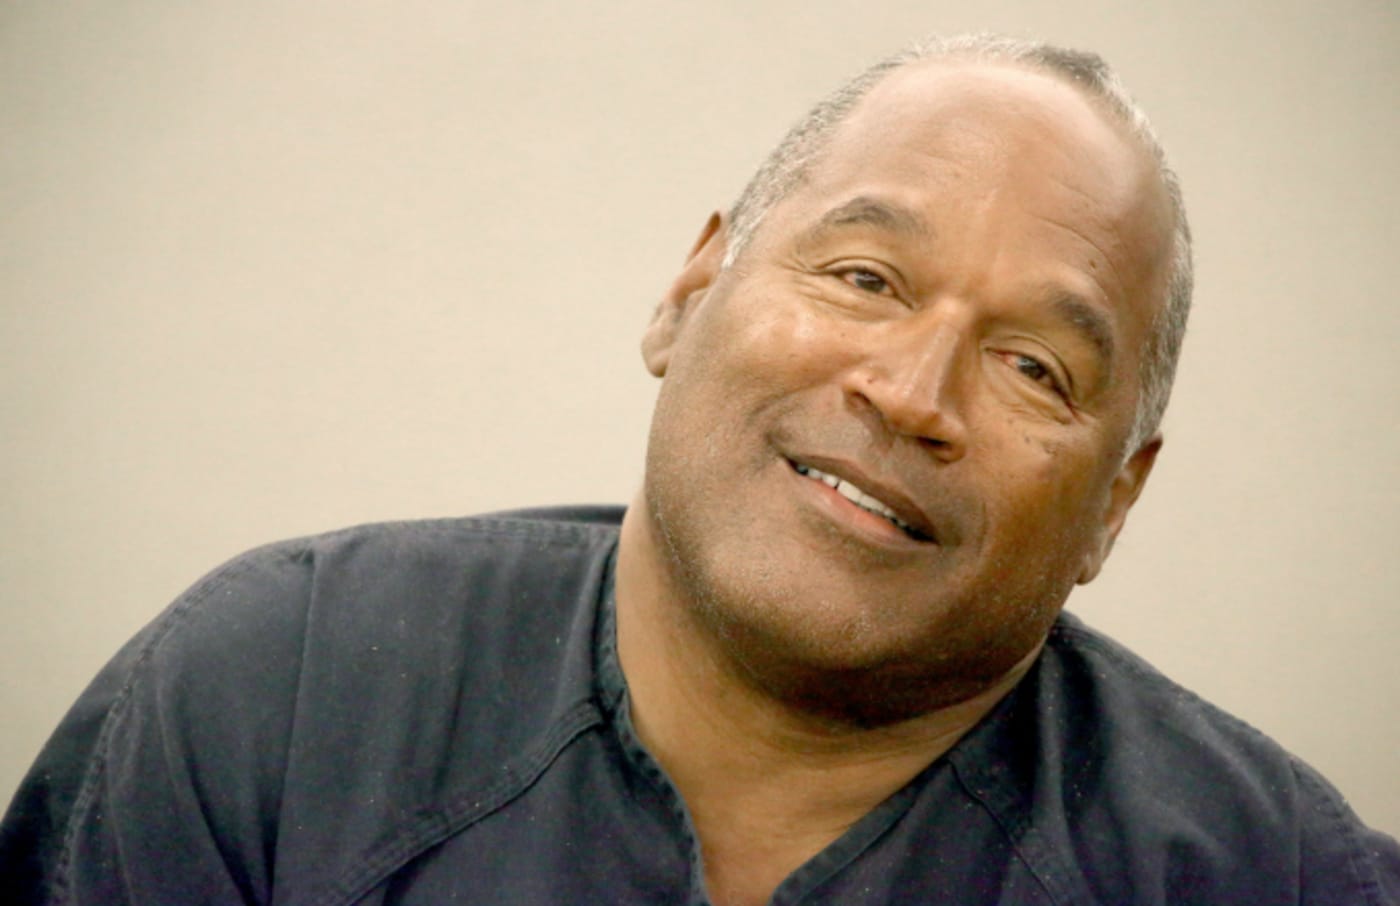 O.J. Simpson testifies during an evidentiary hearing in Clark County District Court